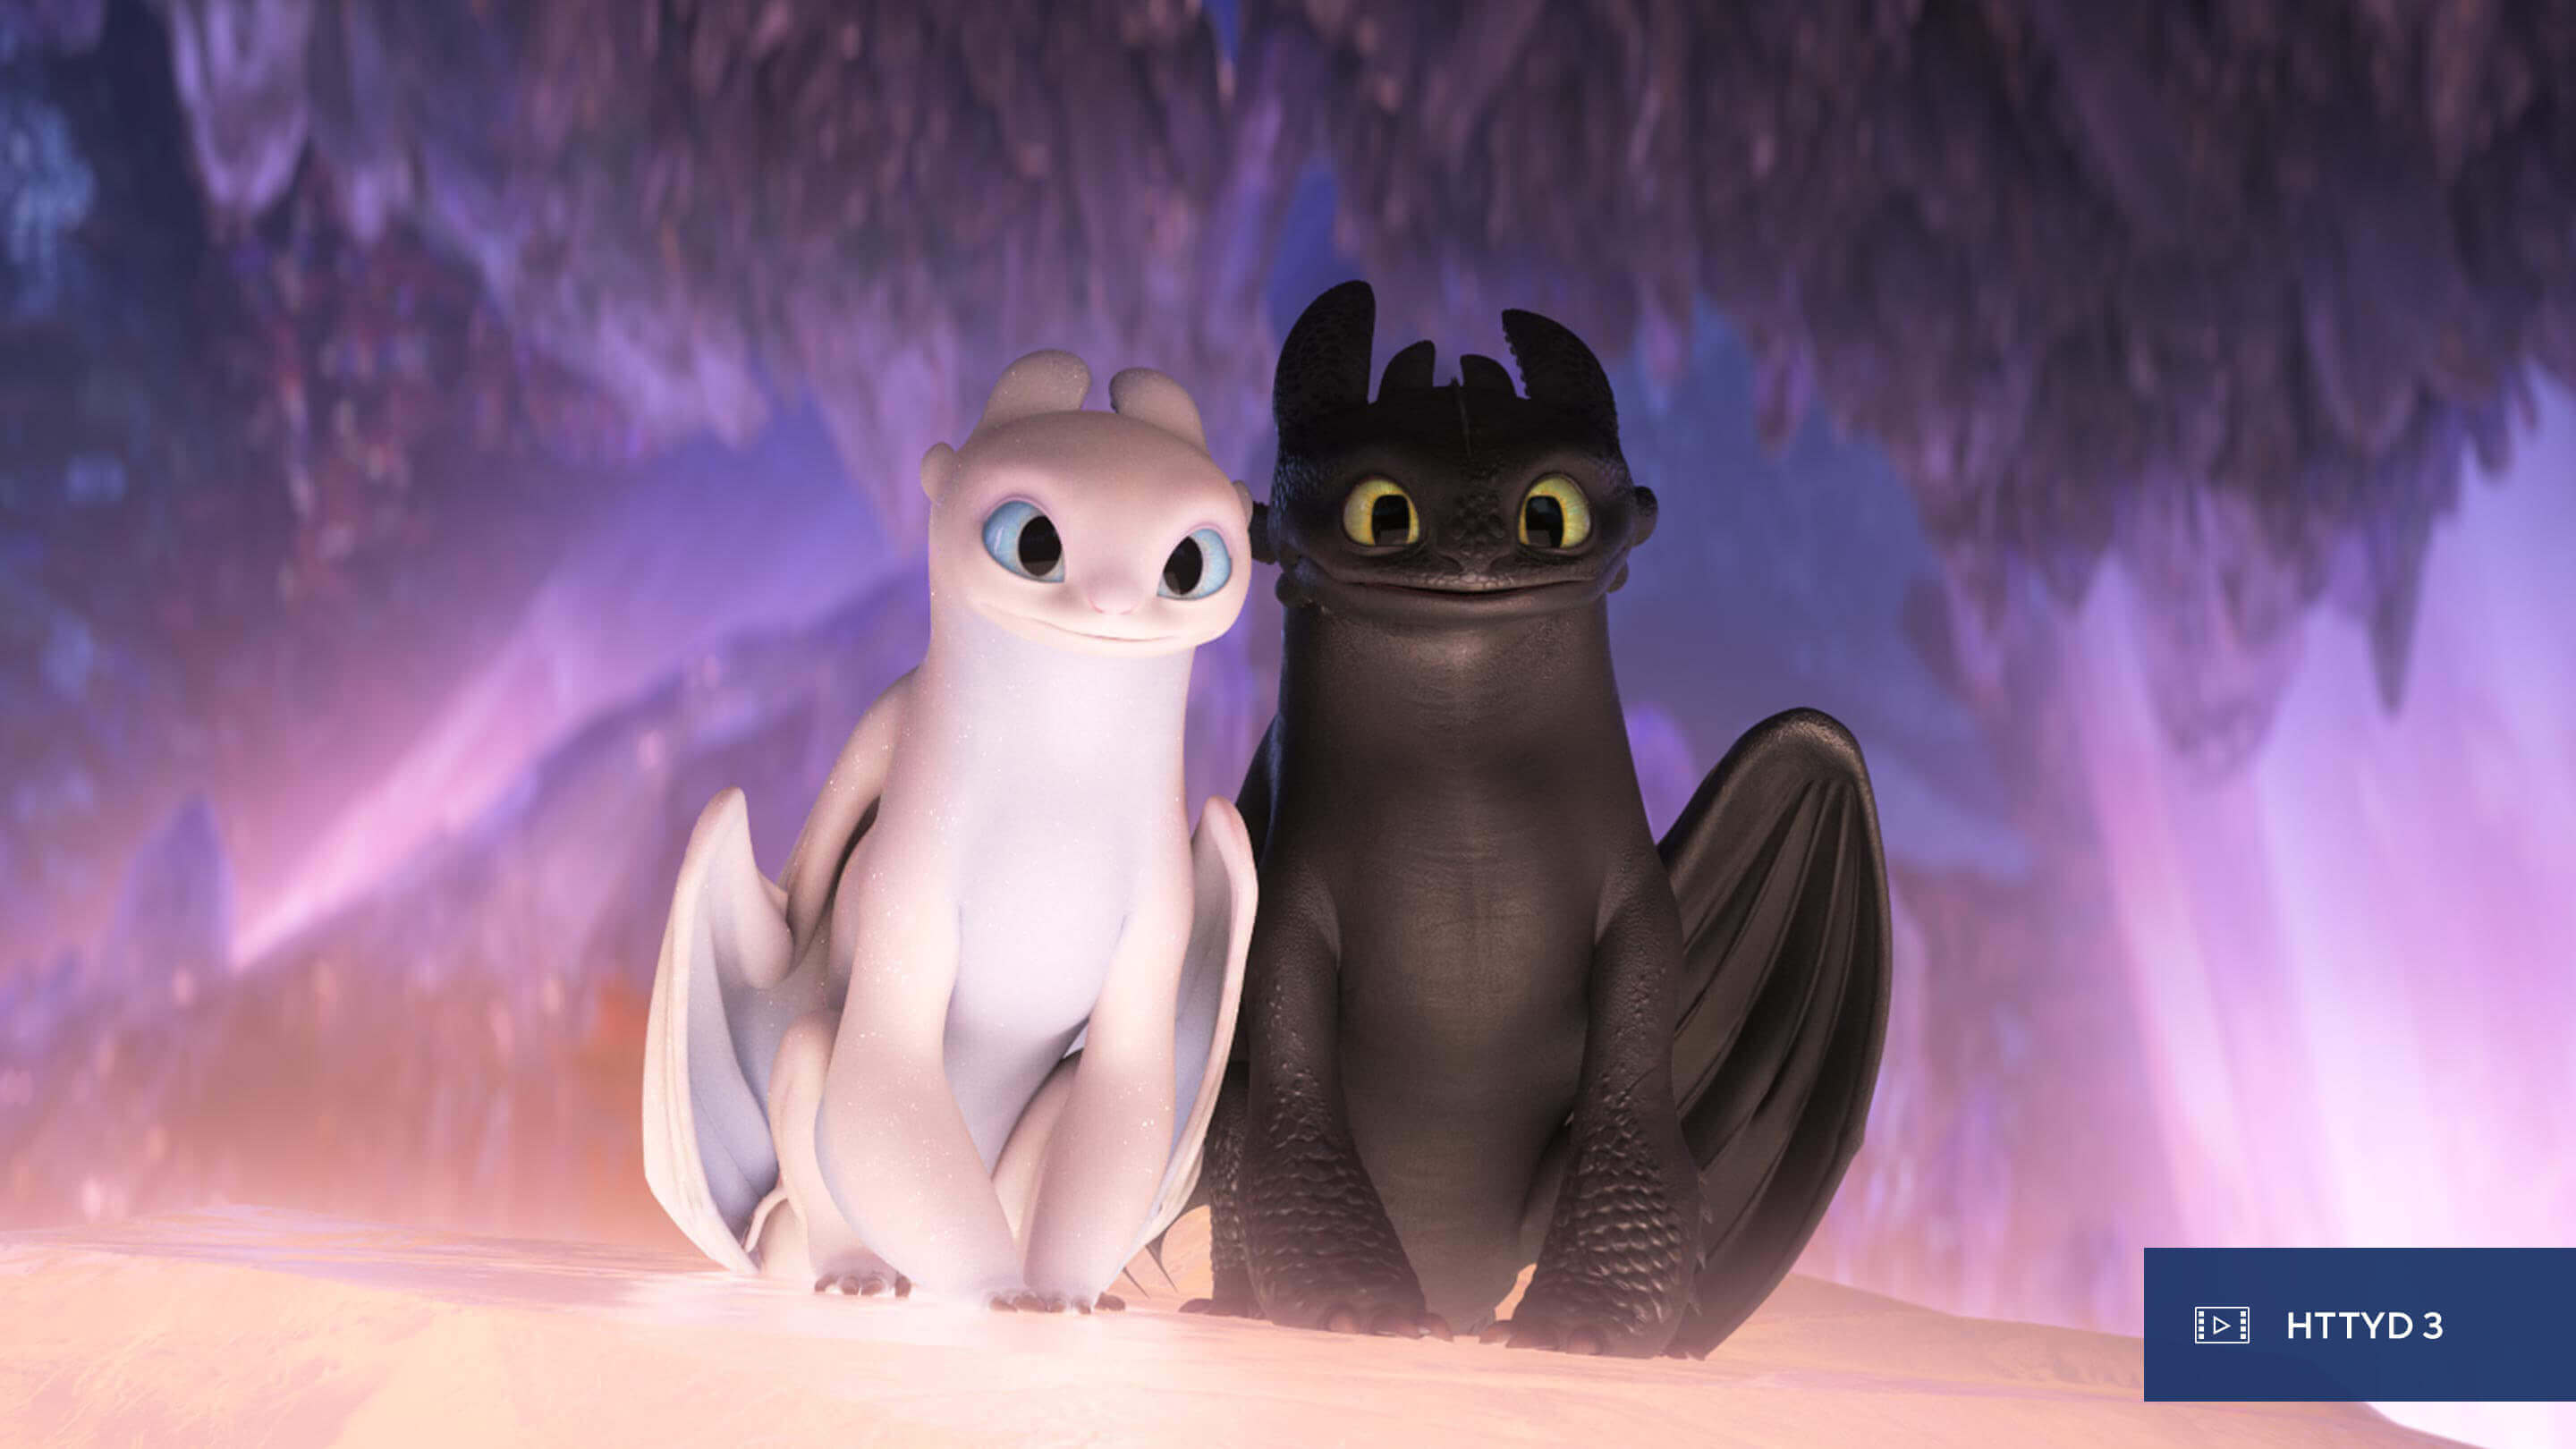 School of Dragons: How to Train Your Dragon - Download